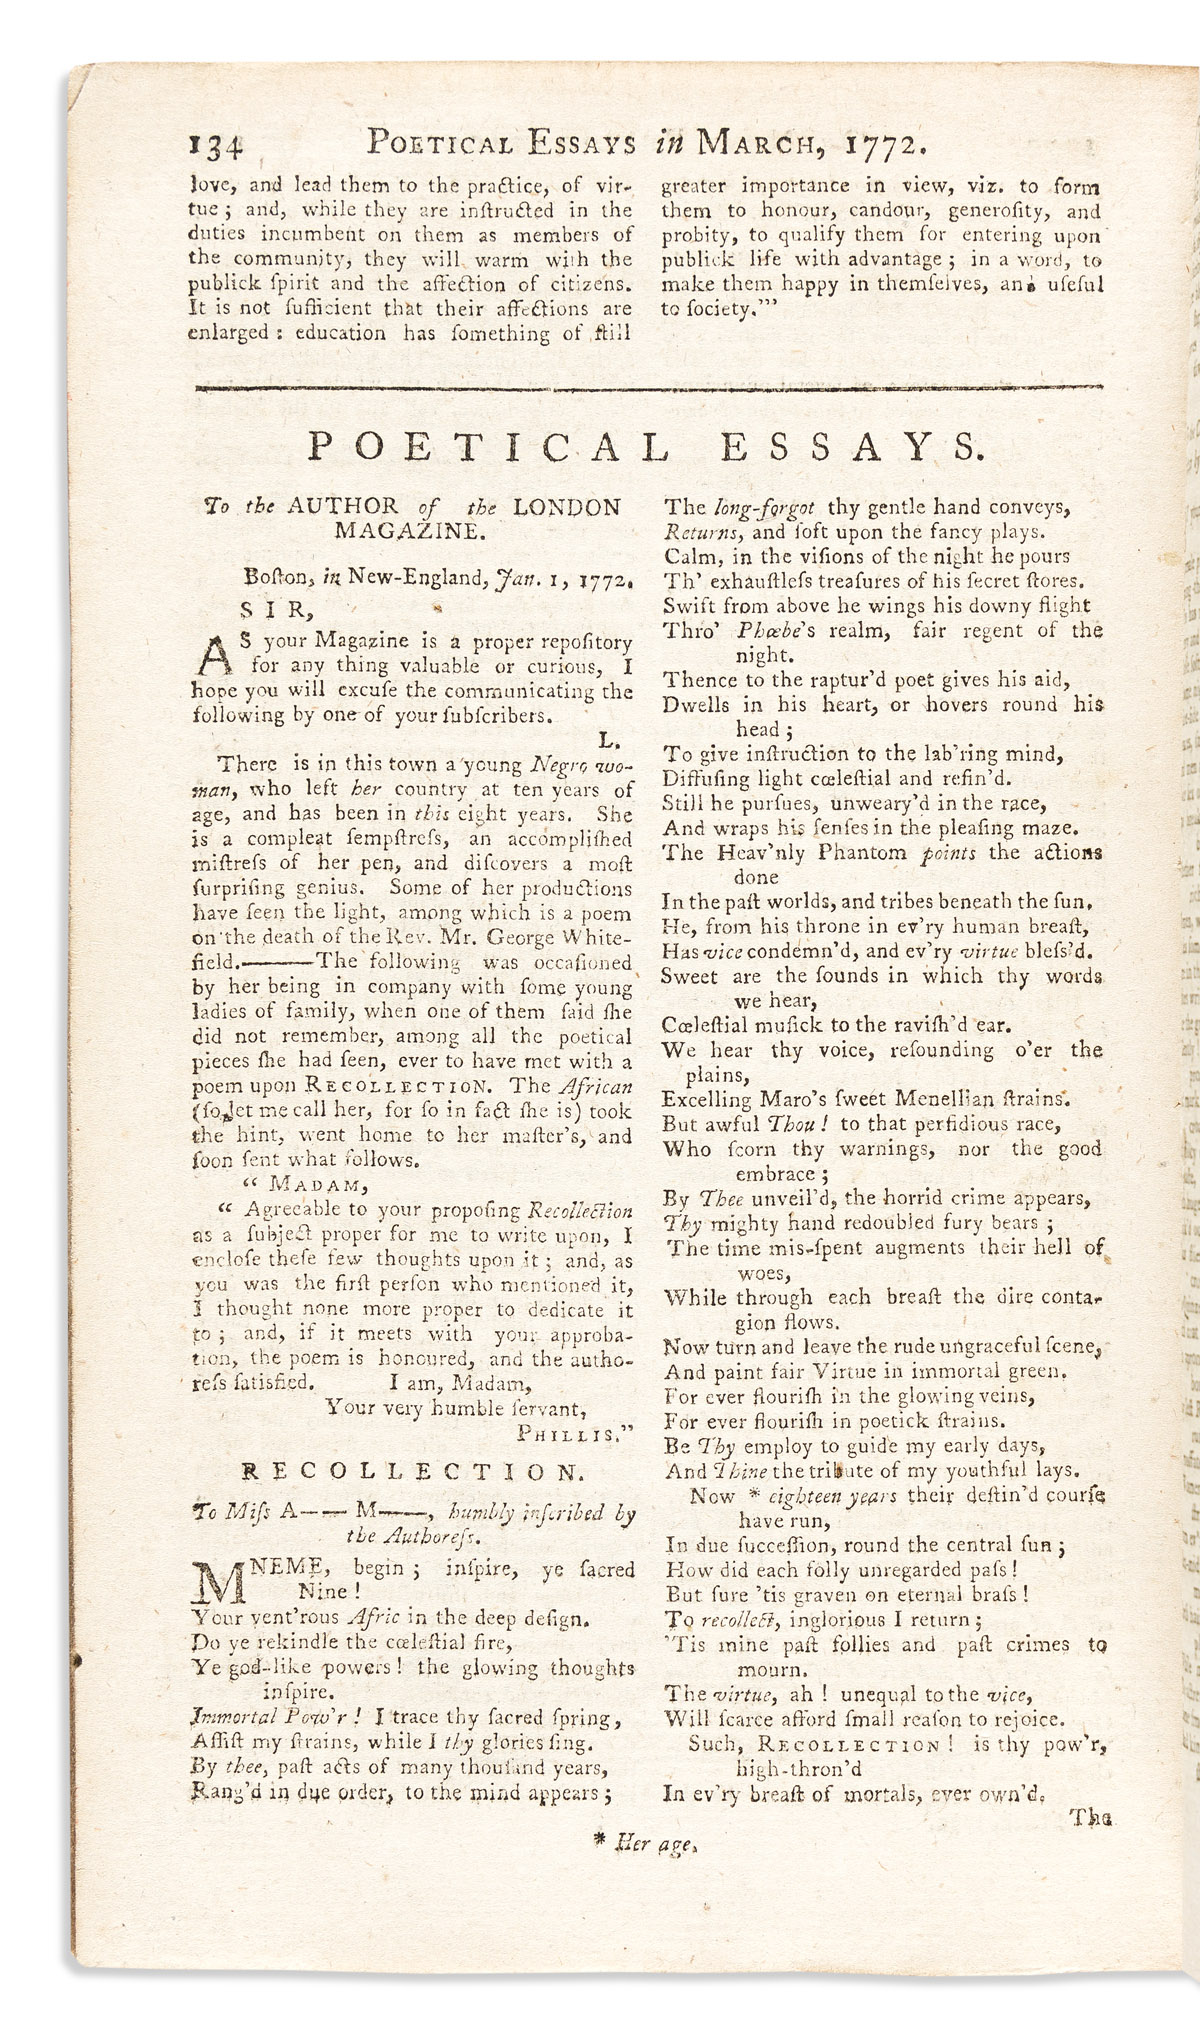 Wheatley, Phillis (c. 1753-1784) "Recollection, to Miss A__ M__, Humbly Inscribed by the Authoress," as printed in The London Magazine.